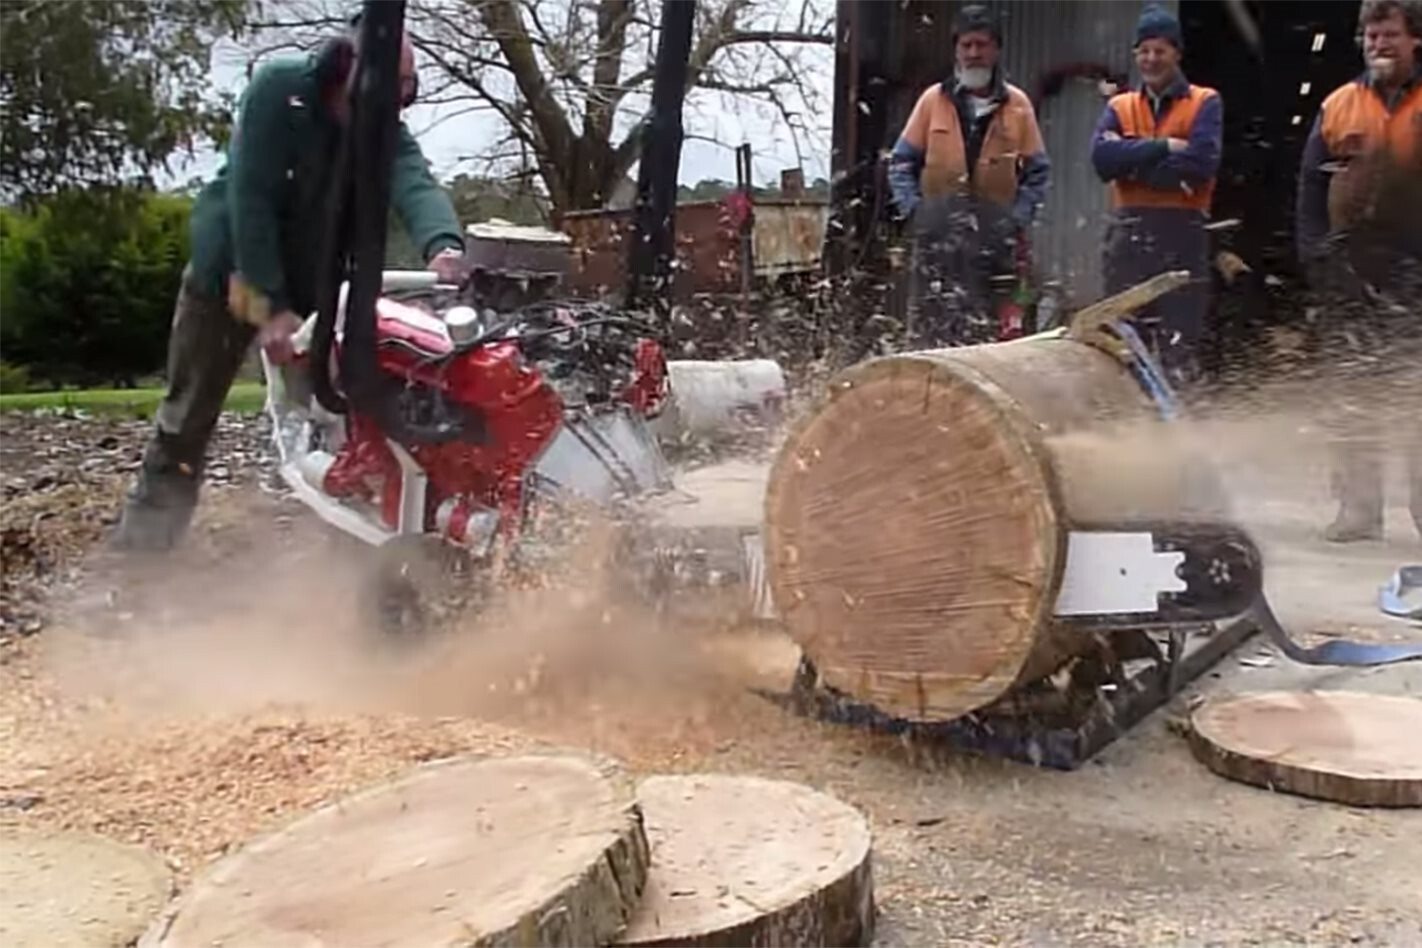 V8 CHAINSAW IS AUSSIE ENGINEERING AT ITS FINEST